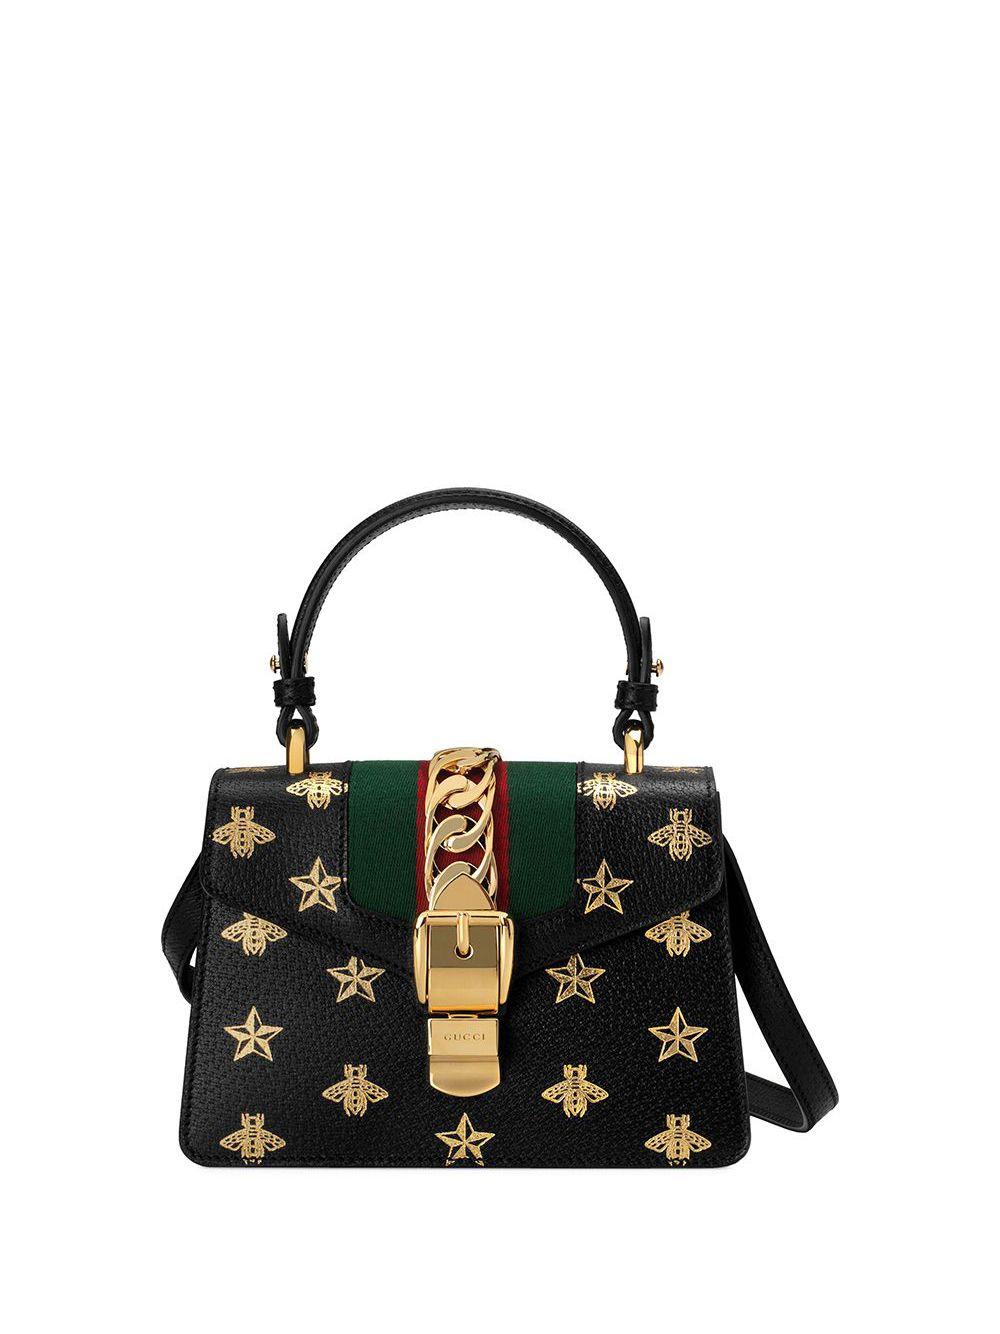 Gucci Sylvie Bee Star Mini Leather Bag in Black | Lyst